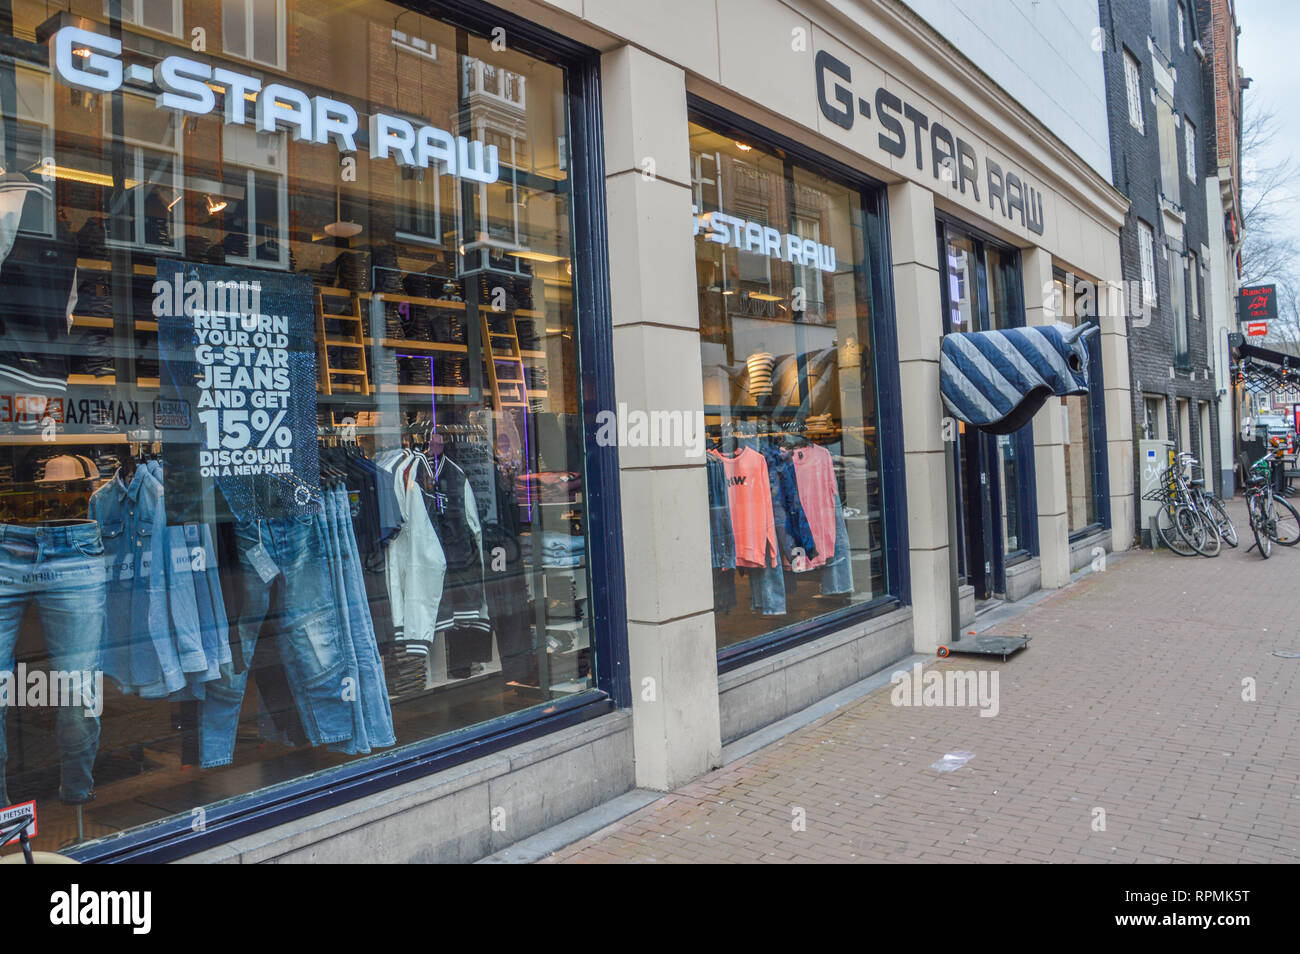 G Star Raw High Resolution Stock Photography and Images - Alamy